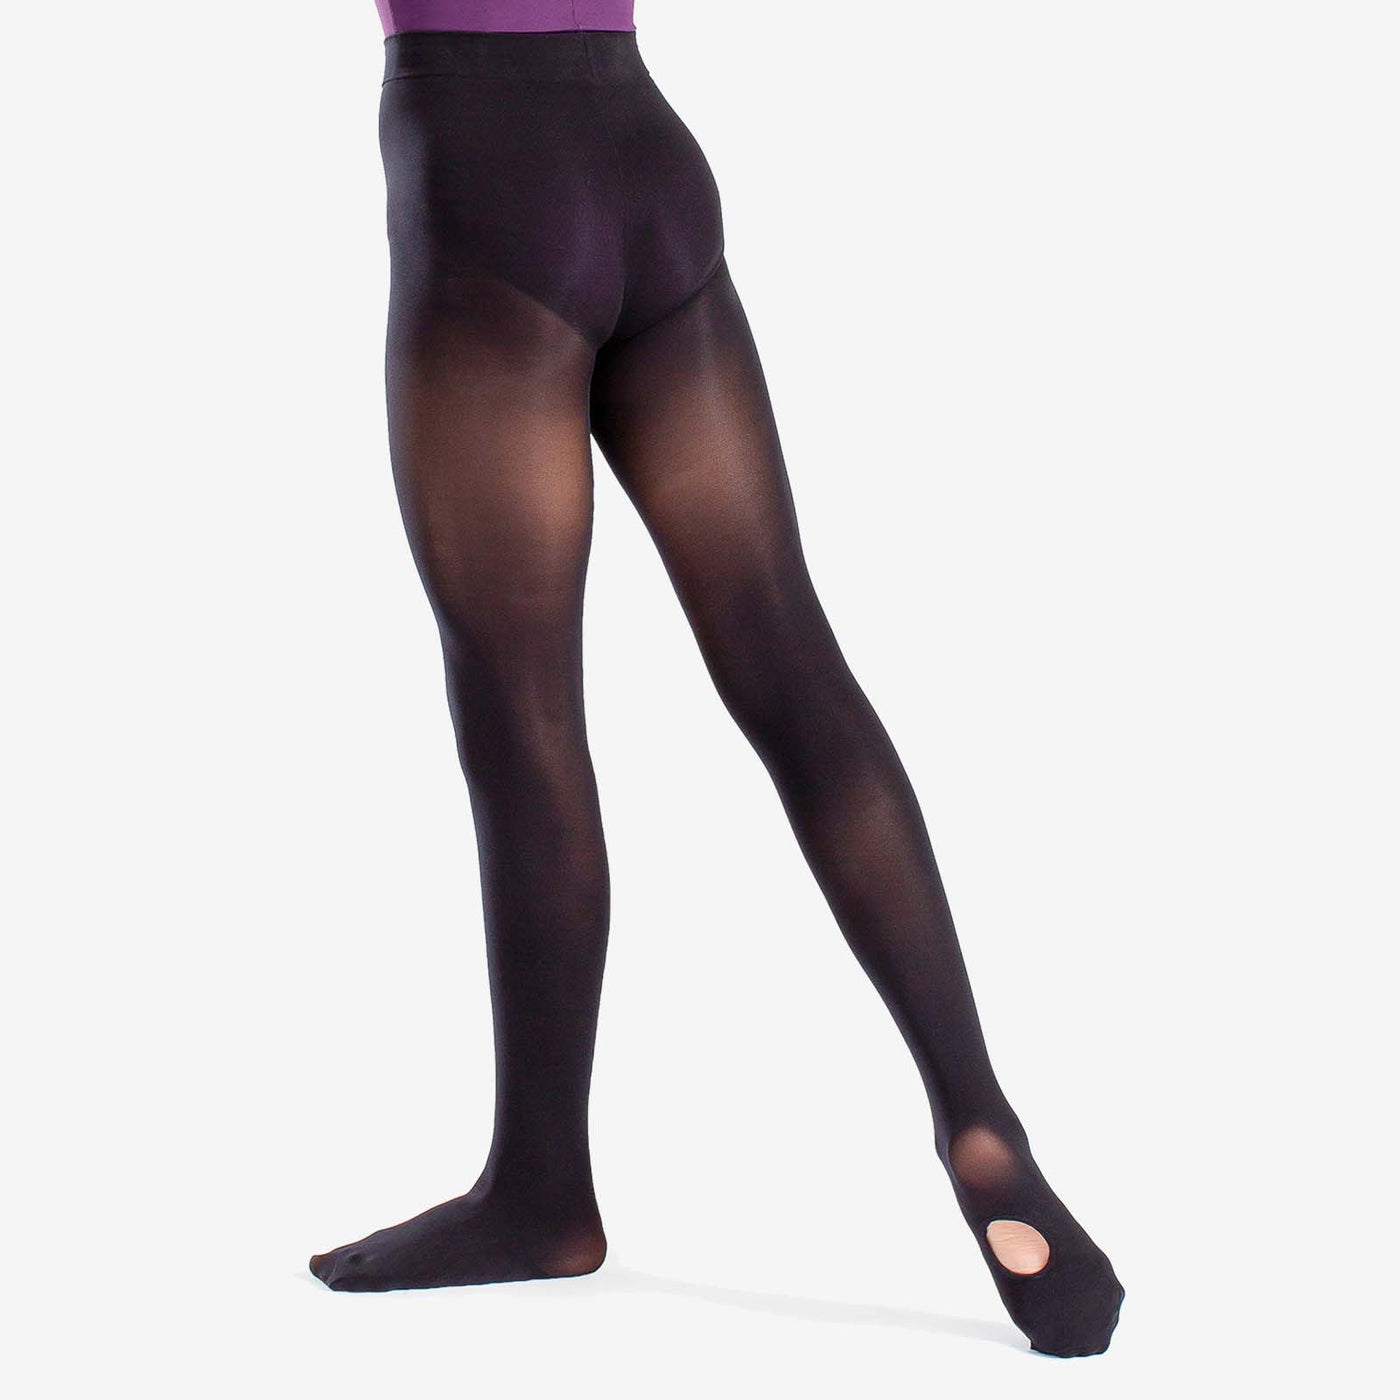 TS81 Children's Transition / Convertible Tights with Self Knit